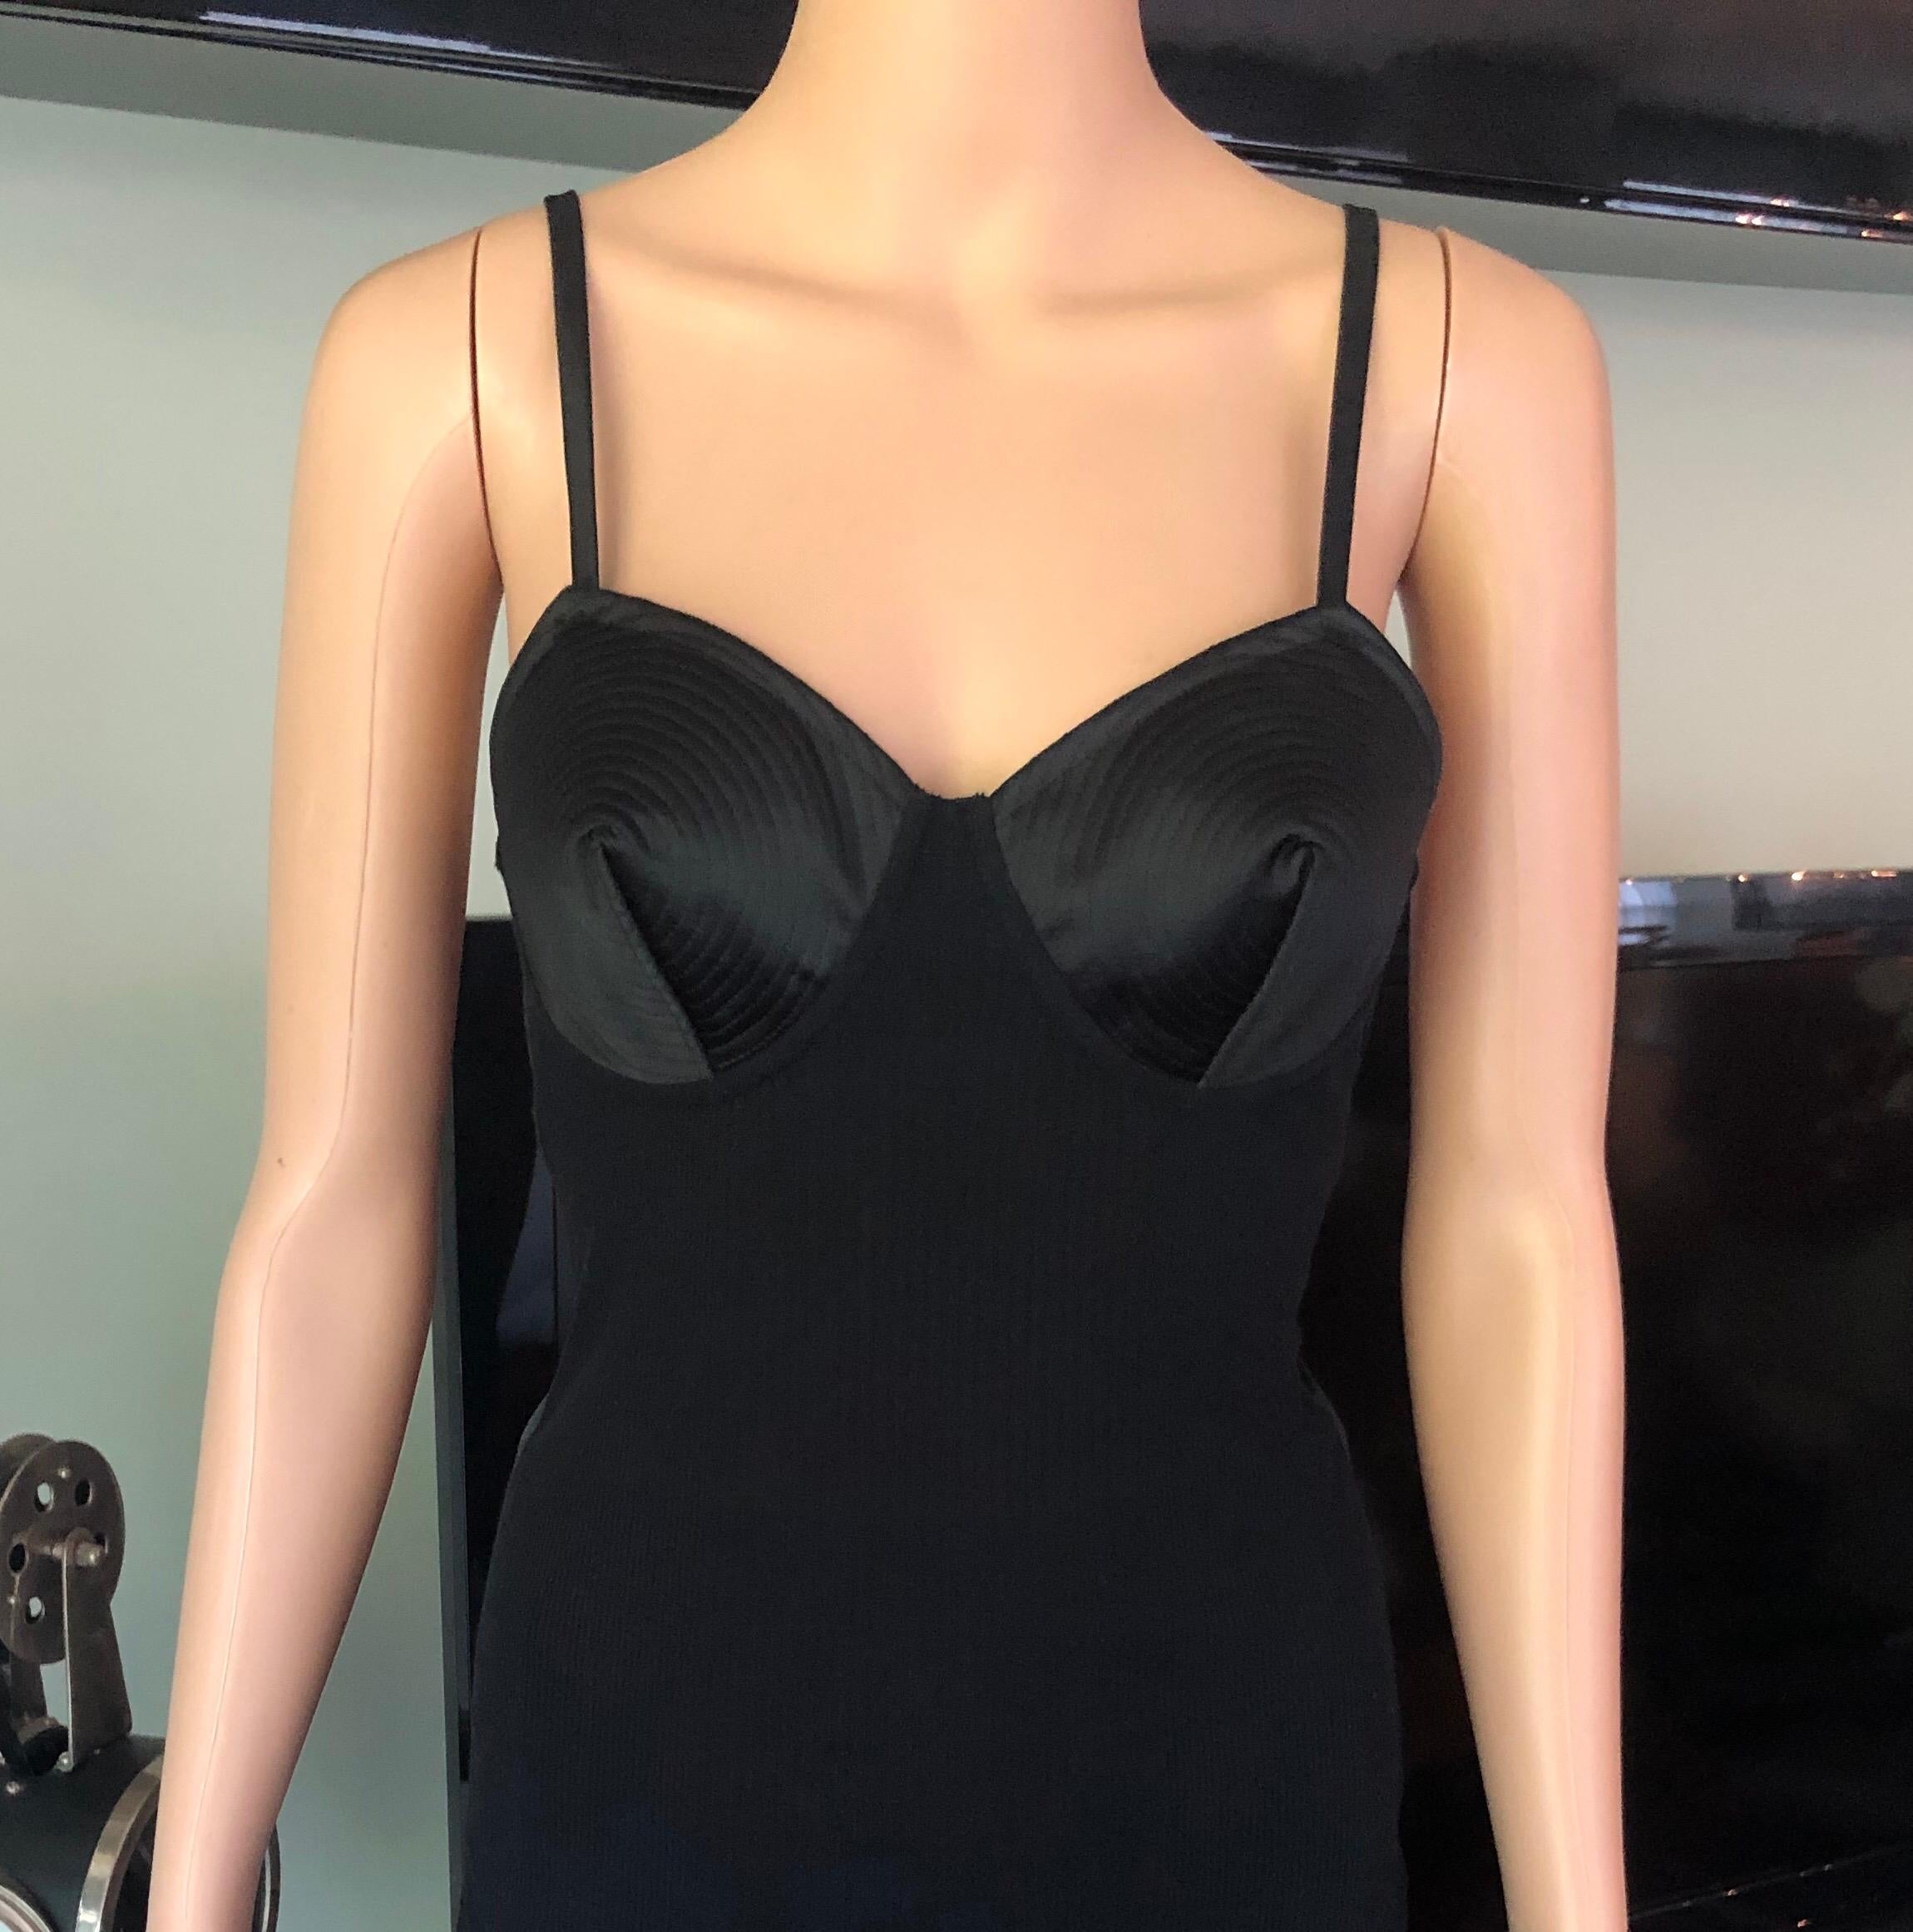 Jean Paul Gaultier Bondage Cone Bra Top and Mini Skirt 2 Piece Set In Good Condition For Sale In Naples, FL